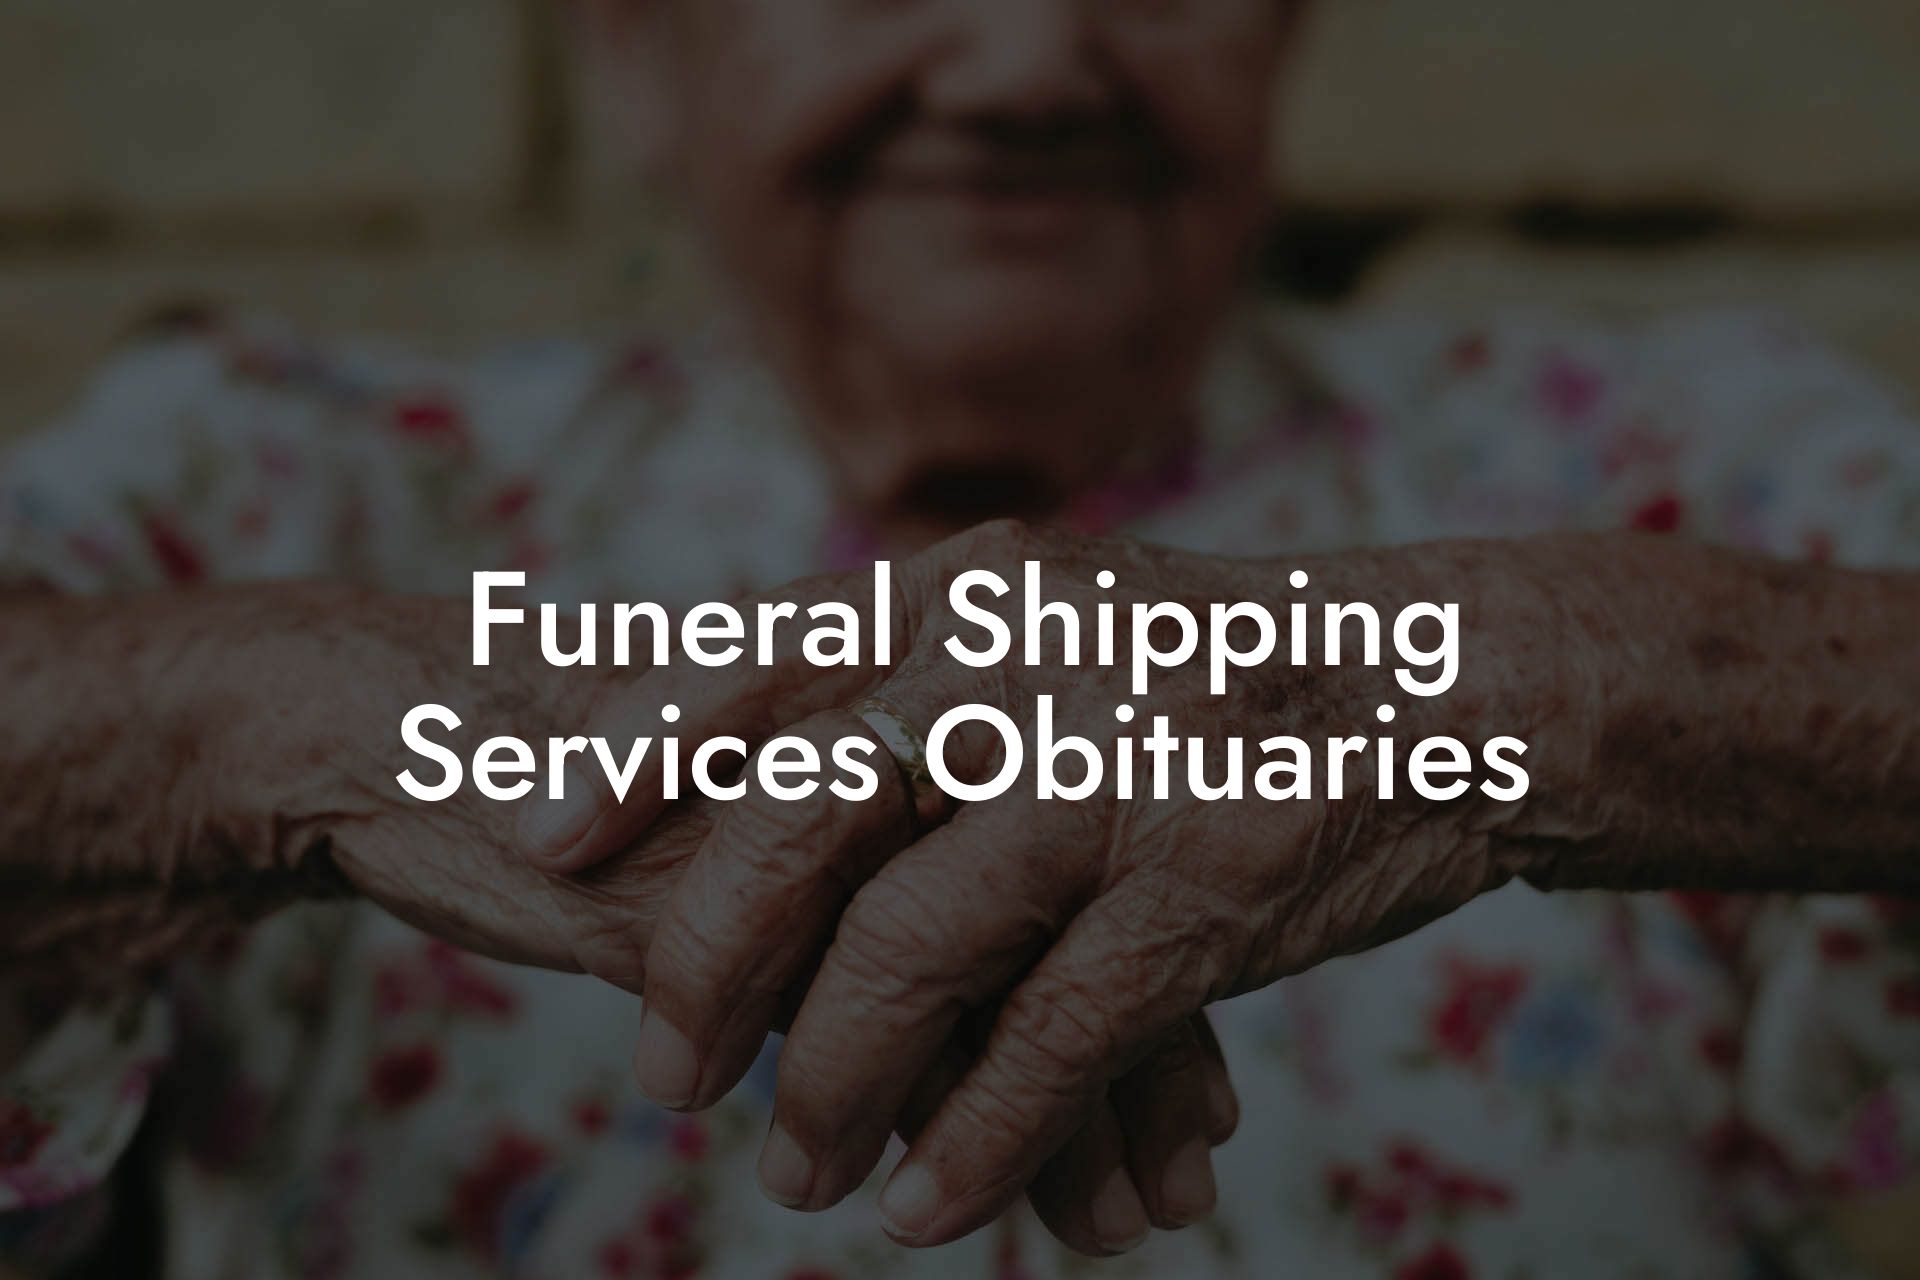 Funeral Shipping Services Obituaries